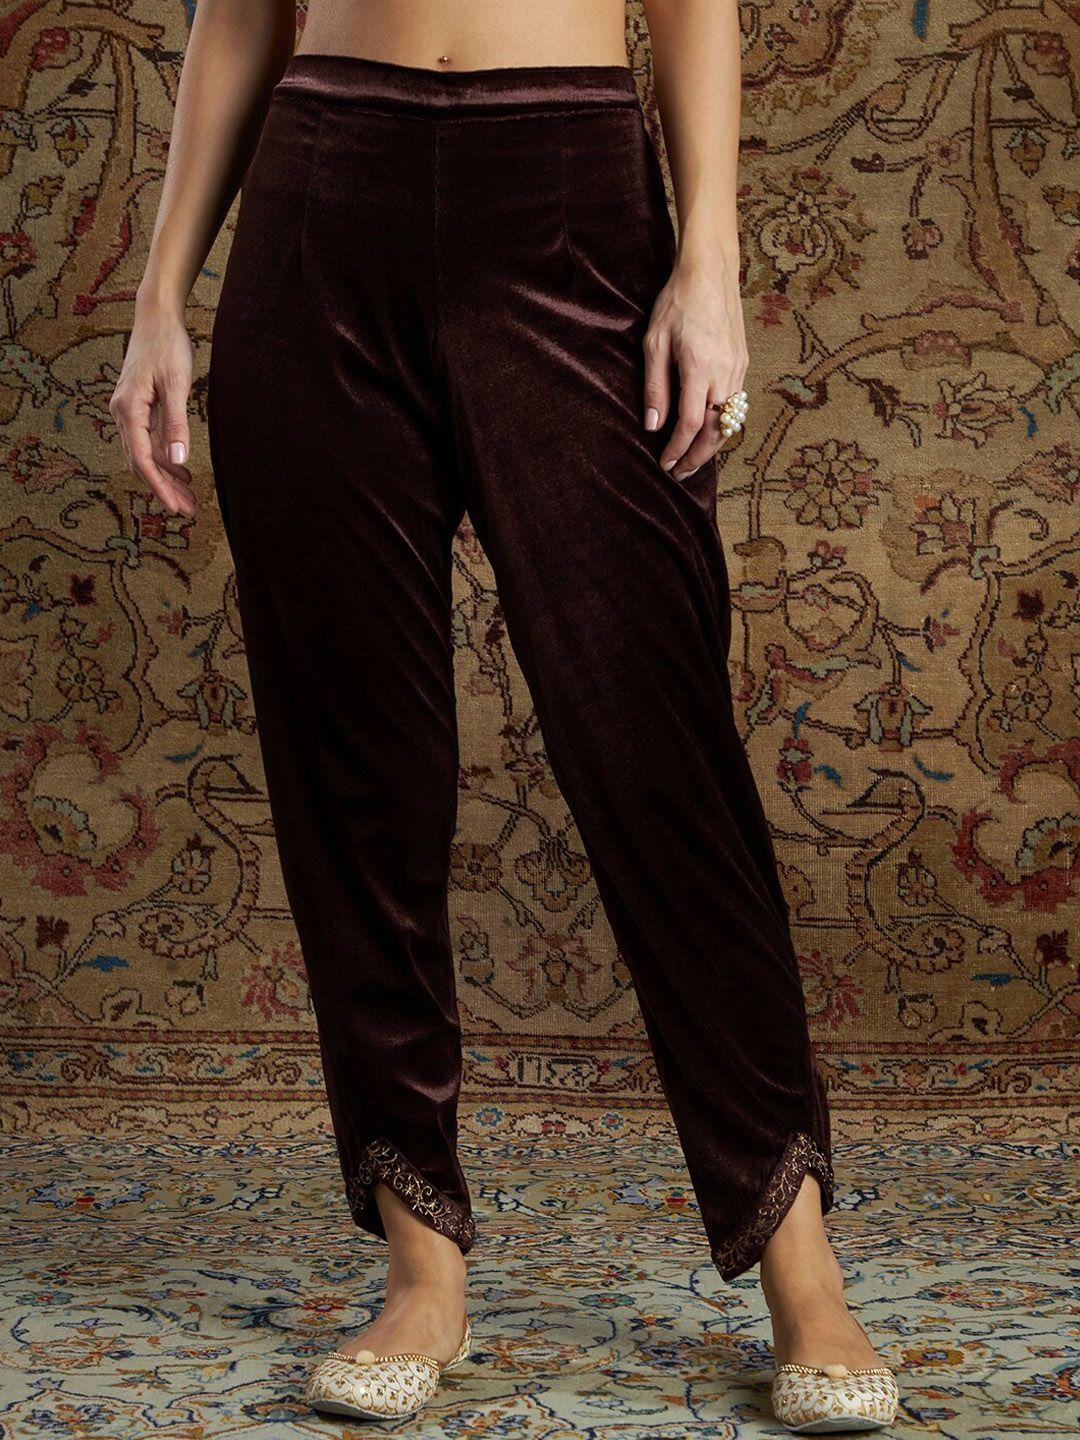 shae-by-sassafras-women-brown-solid-trousers